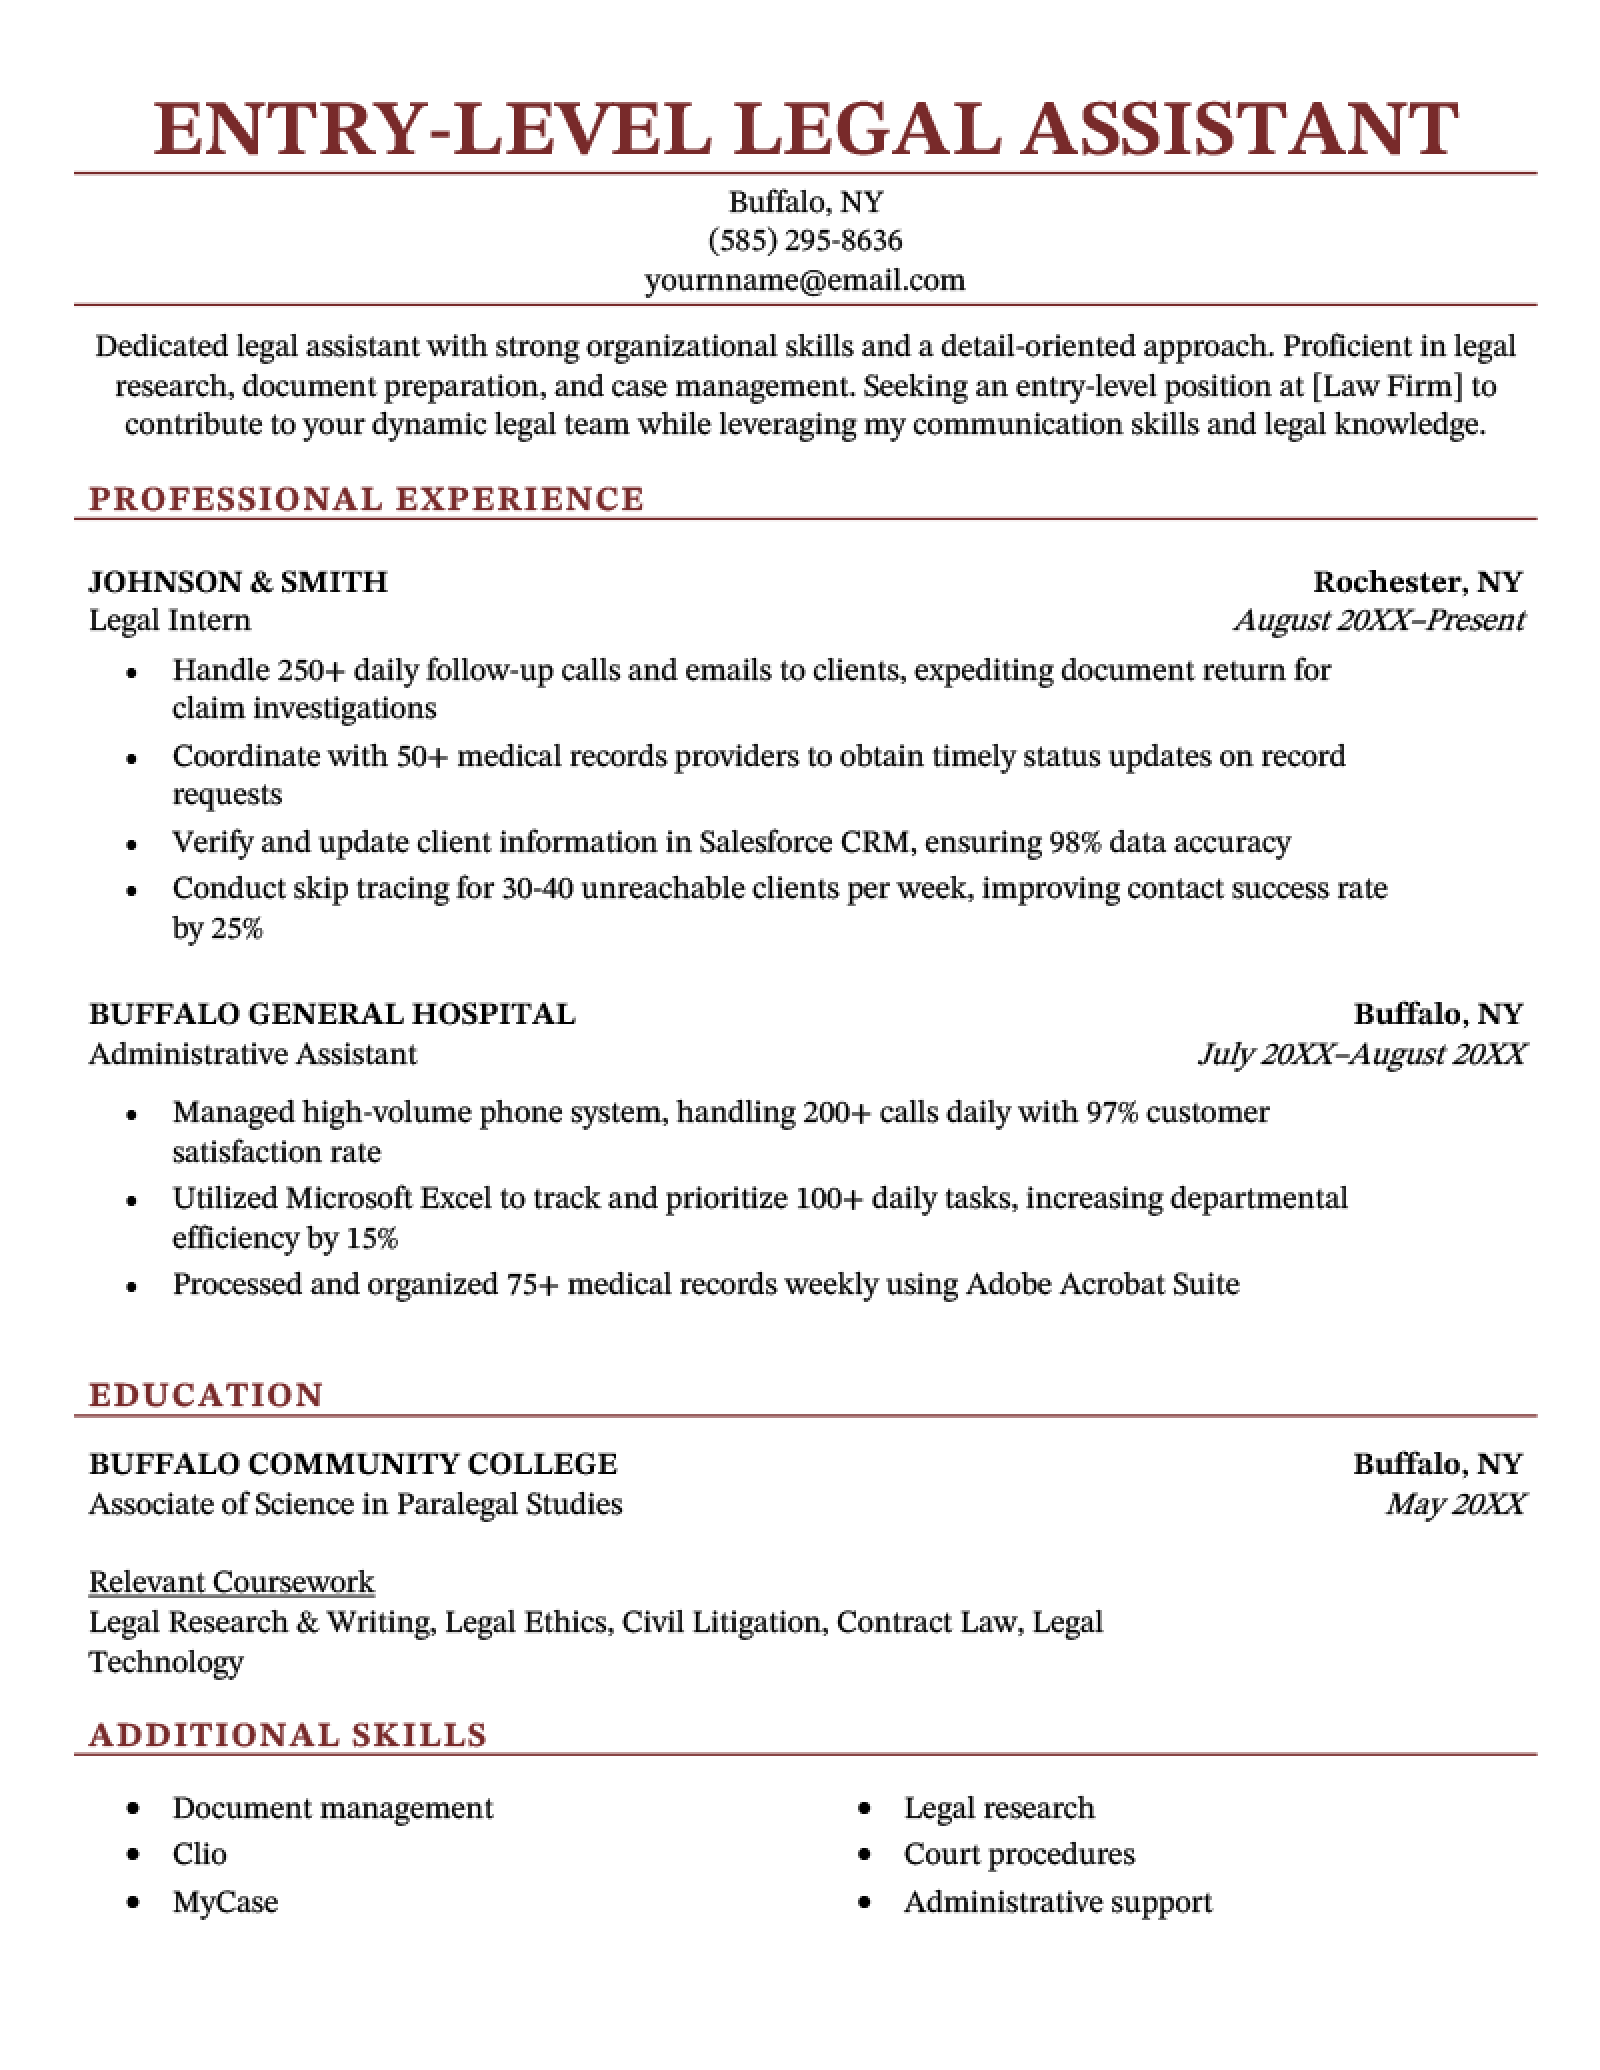 An entry-level legal assistant resume using a template with red headers.